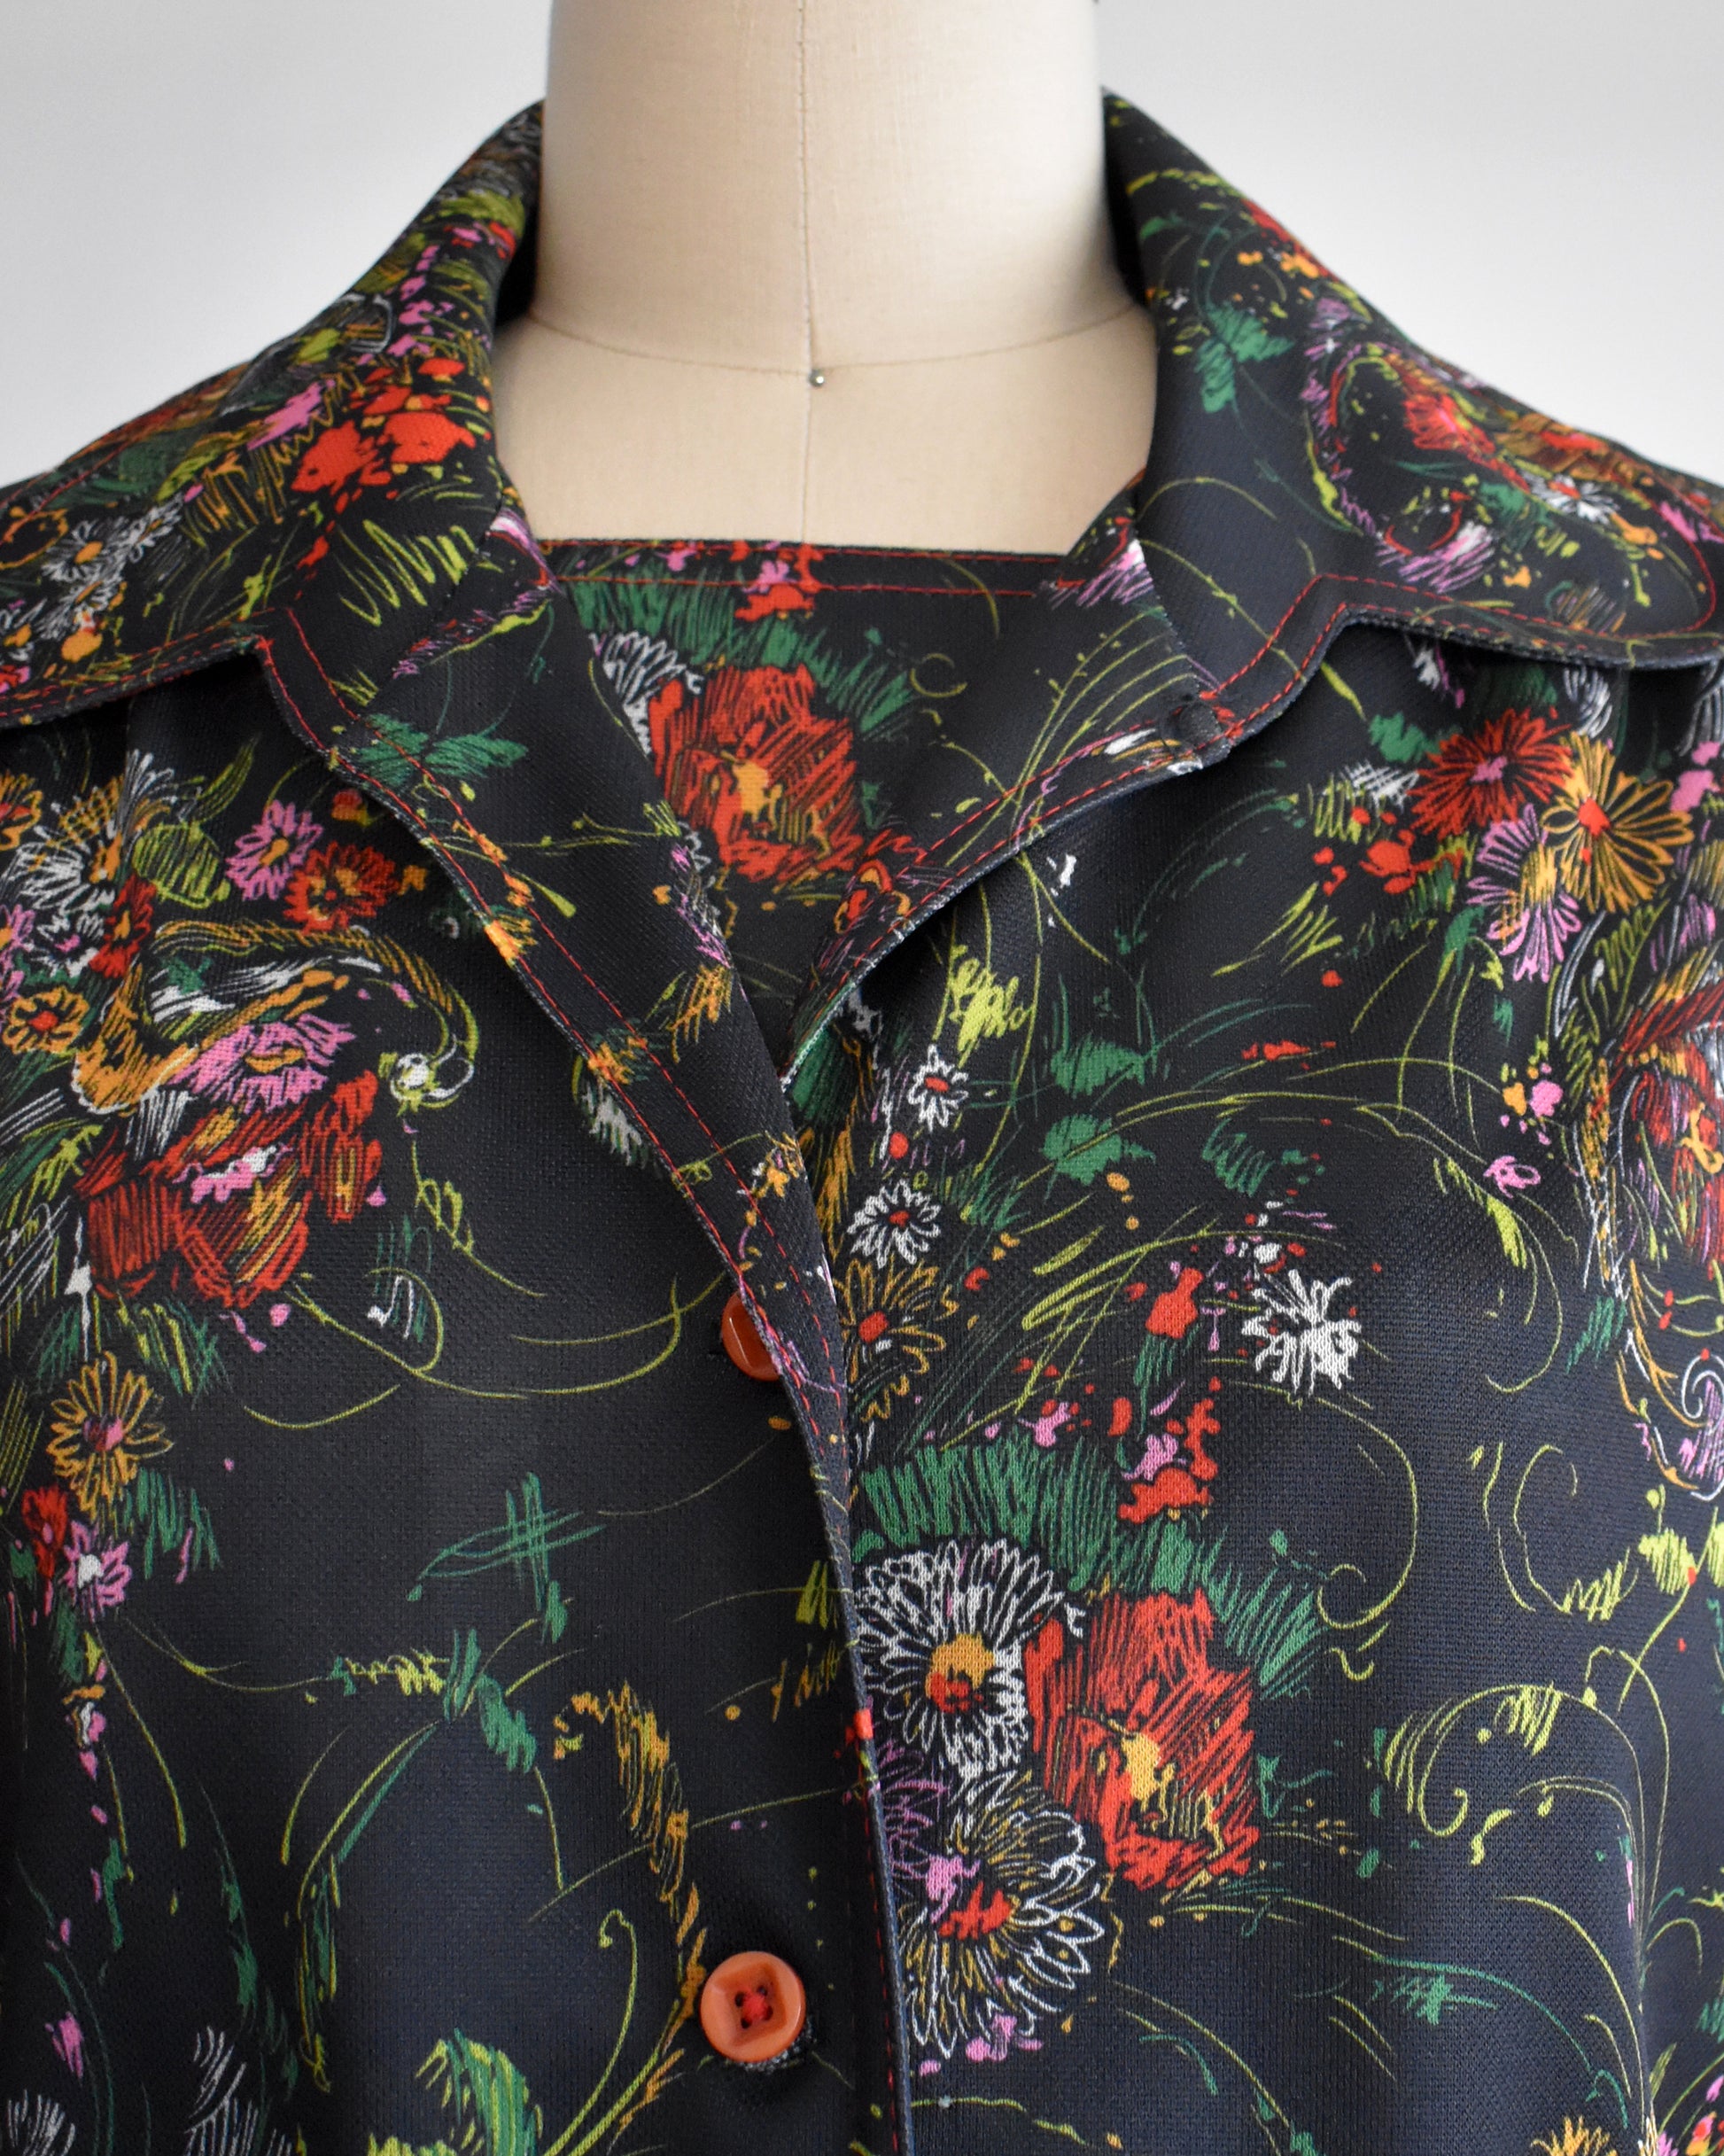 close up of the neckline of the top and dress